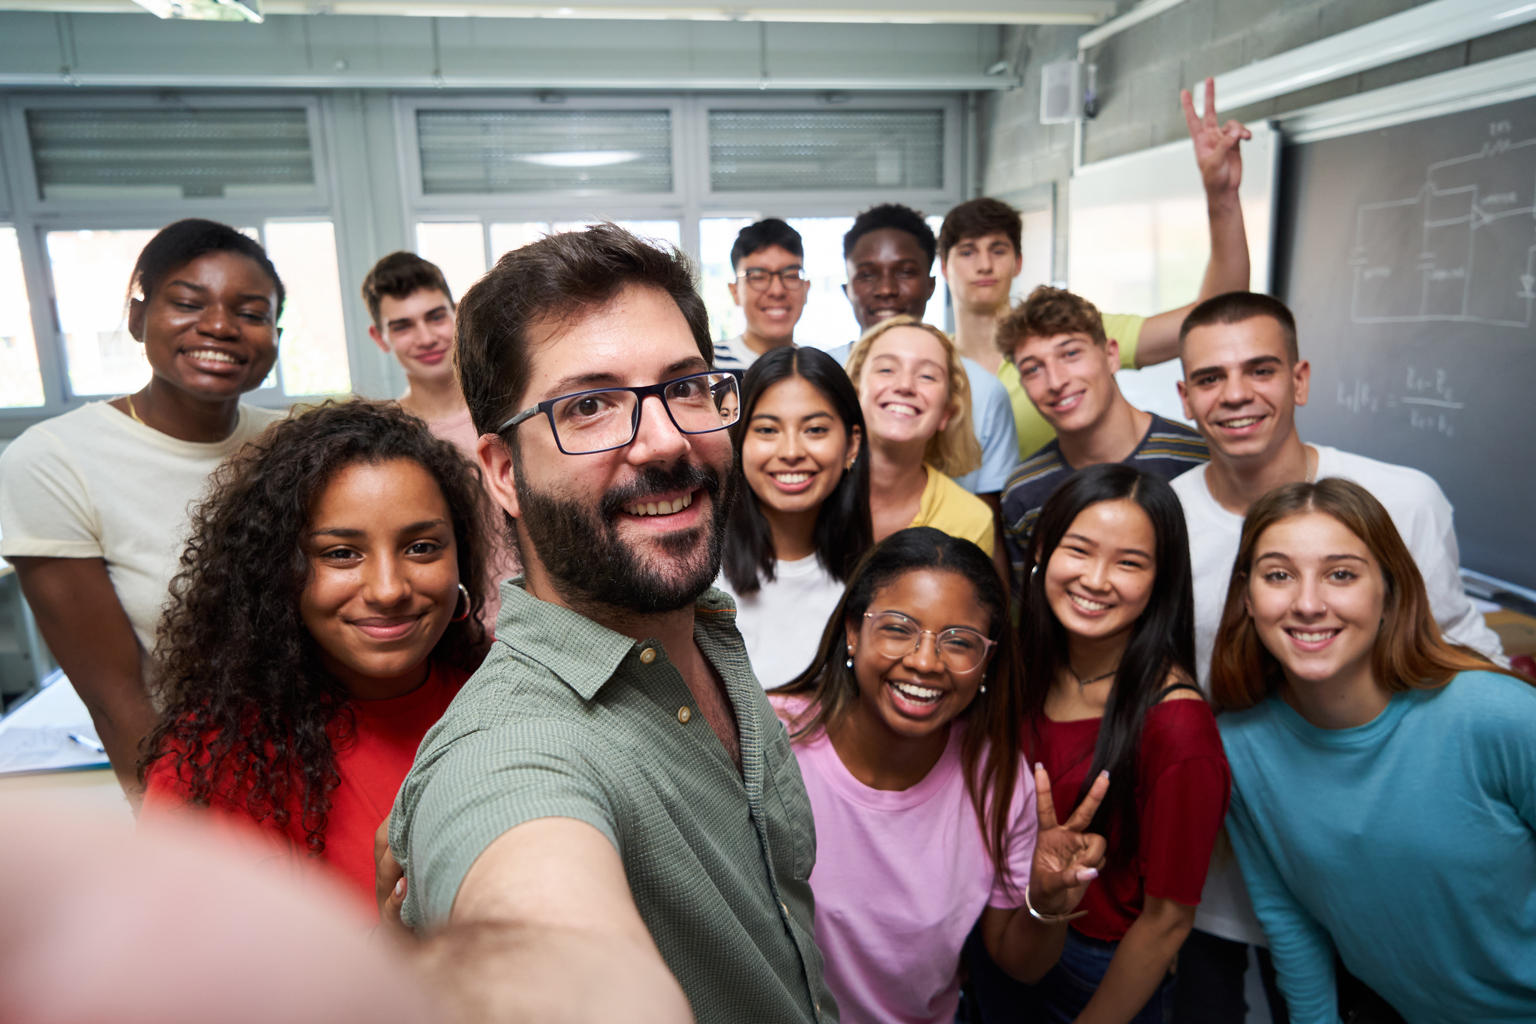 A group in a classroom taking a selfie with their teacher